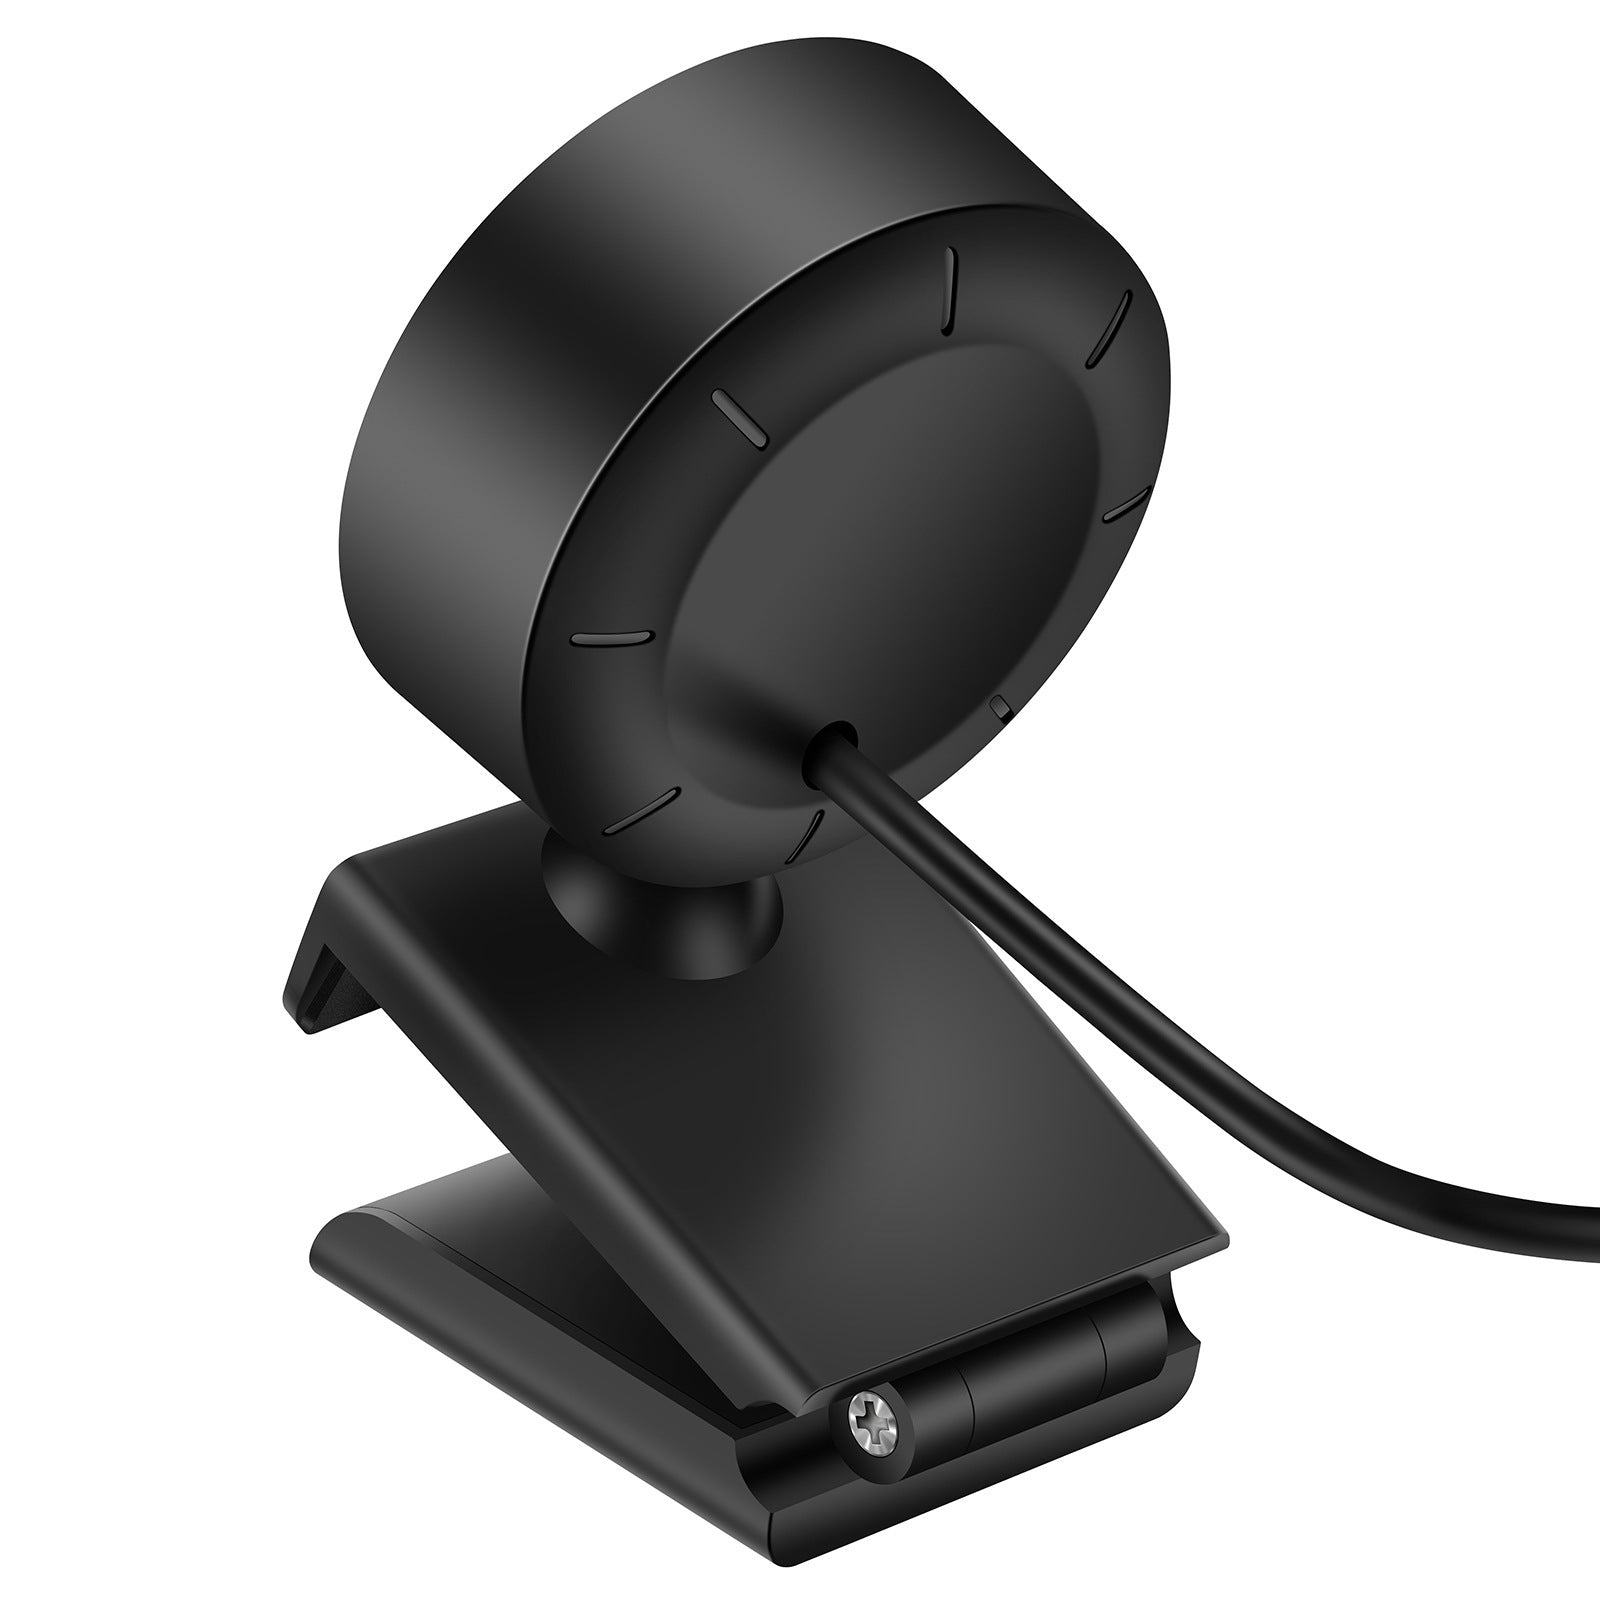 High-Quality USB Camera with LED Supplementary Light for Online Classes, Live Webcasts, and Computer Usage